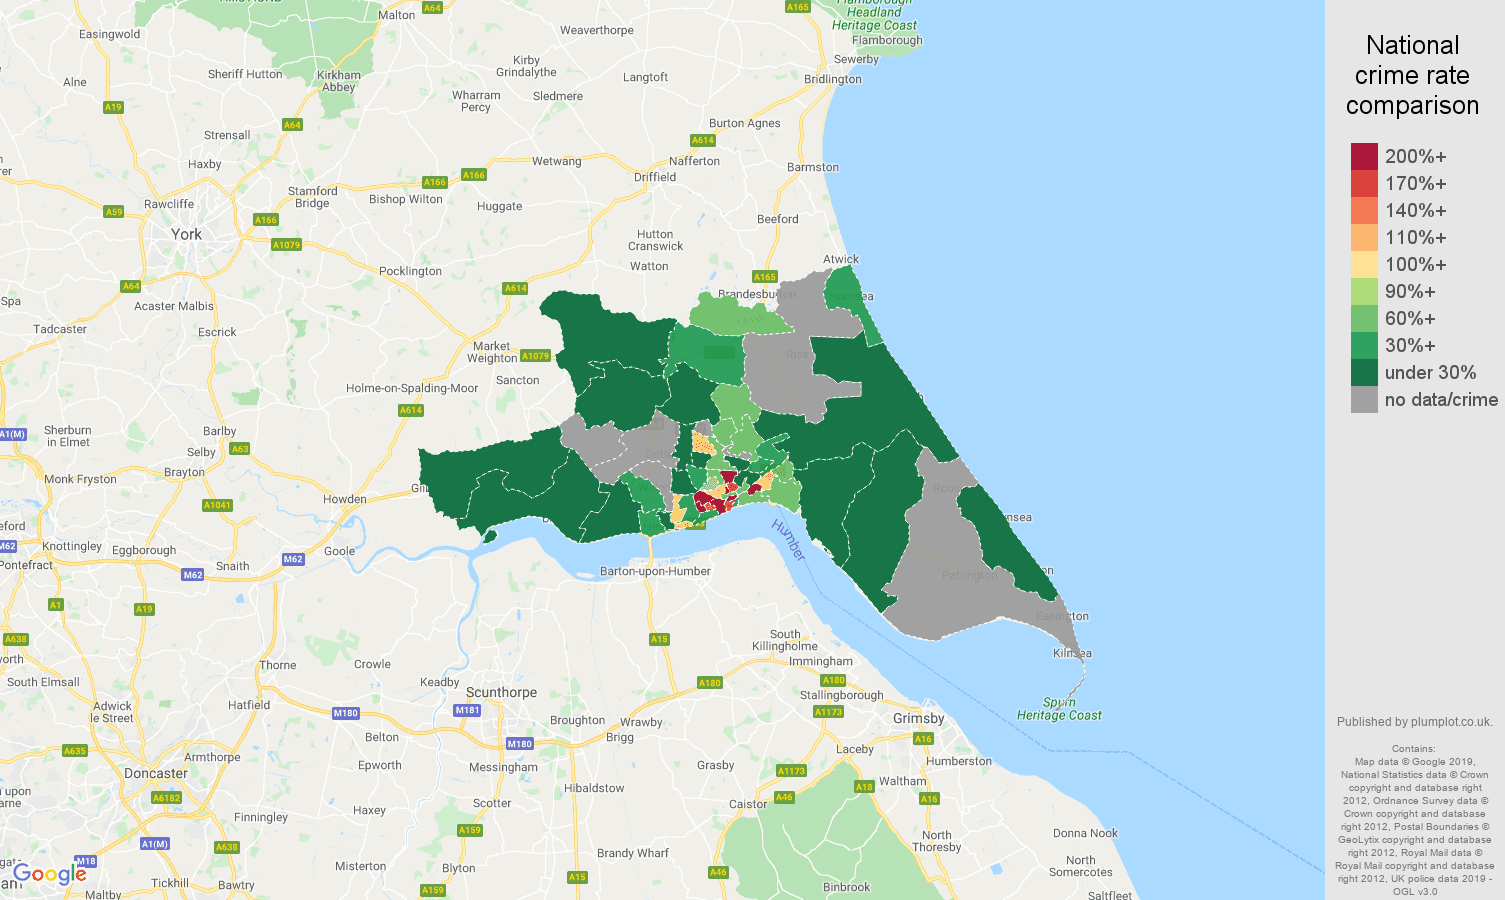 Hull possession of weapons crime rate comparison map